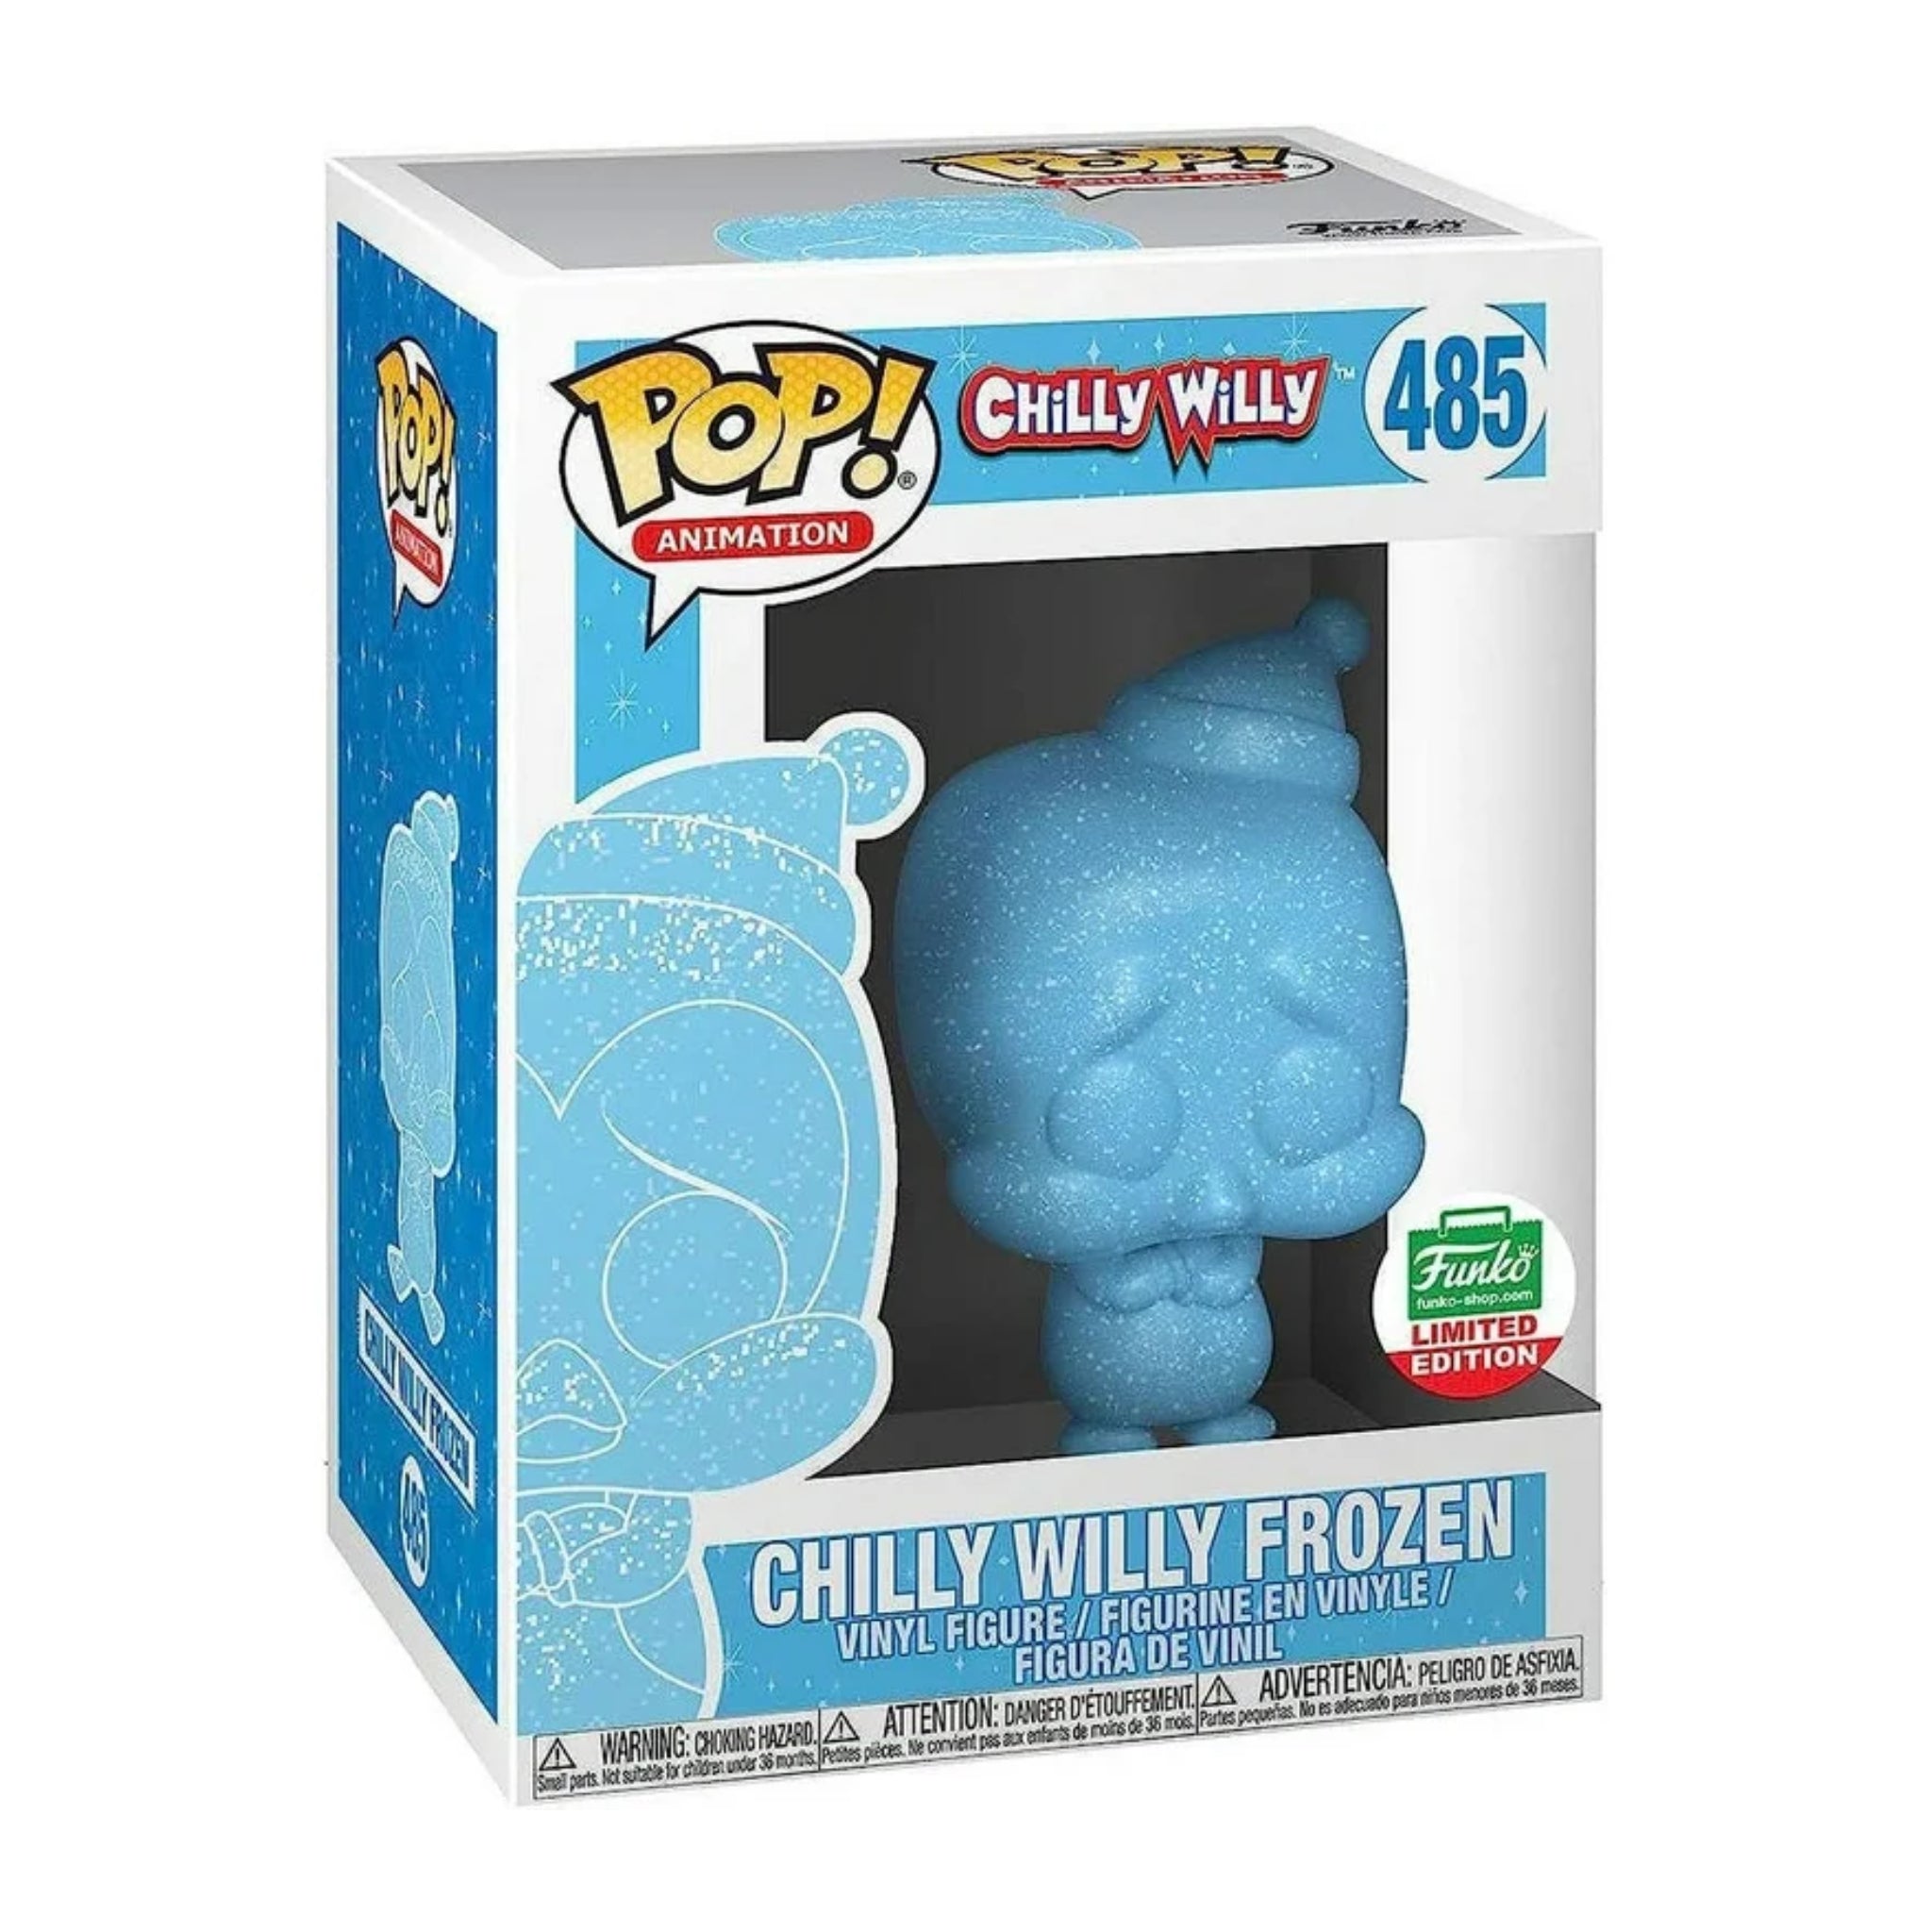 Chilly Willy Frozen Funko Pop! FUNKO LIMITED EDITION